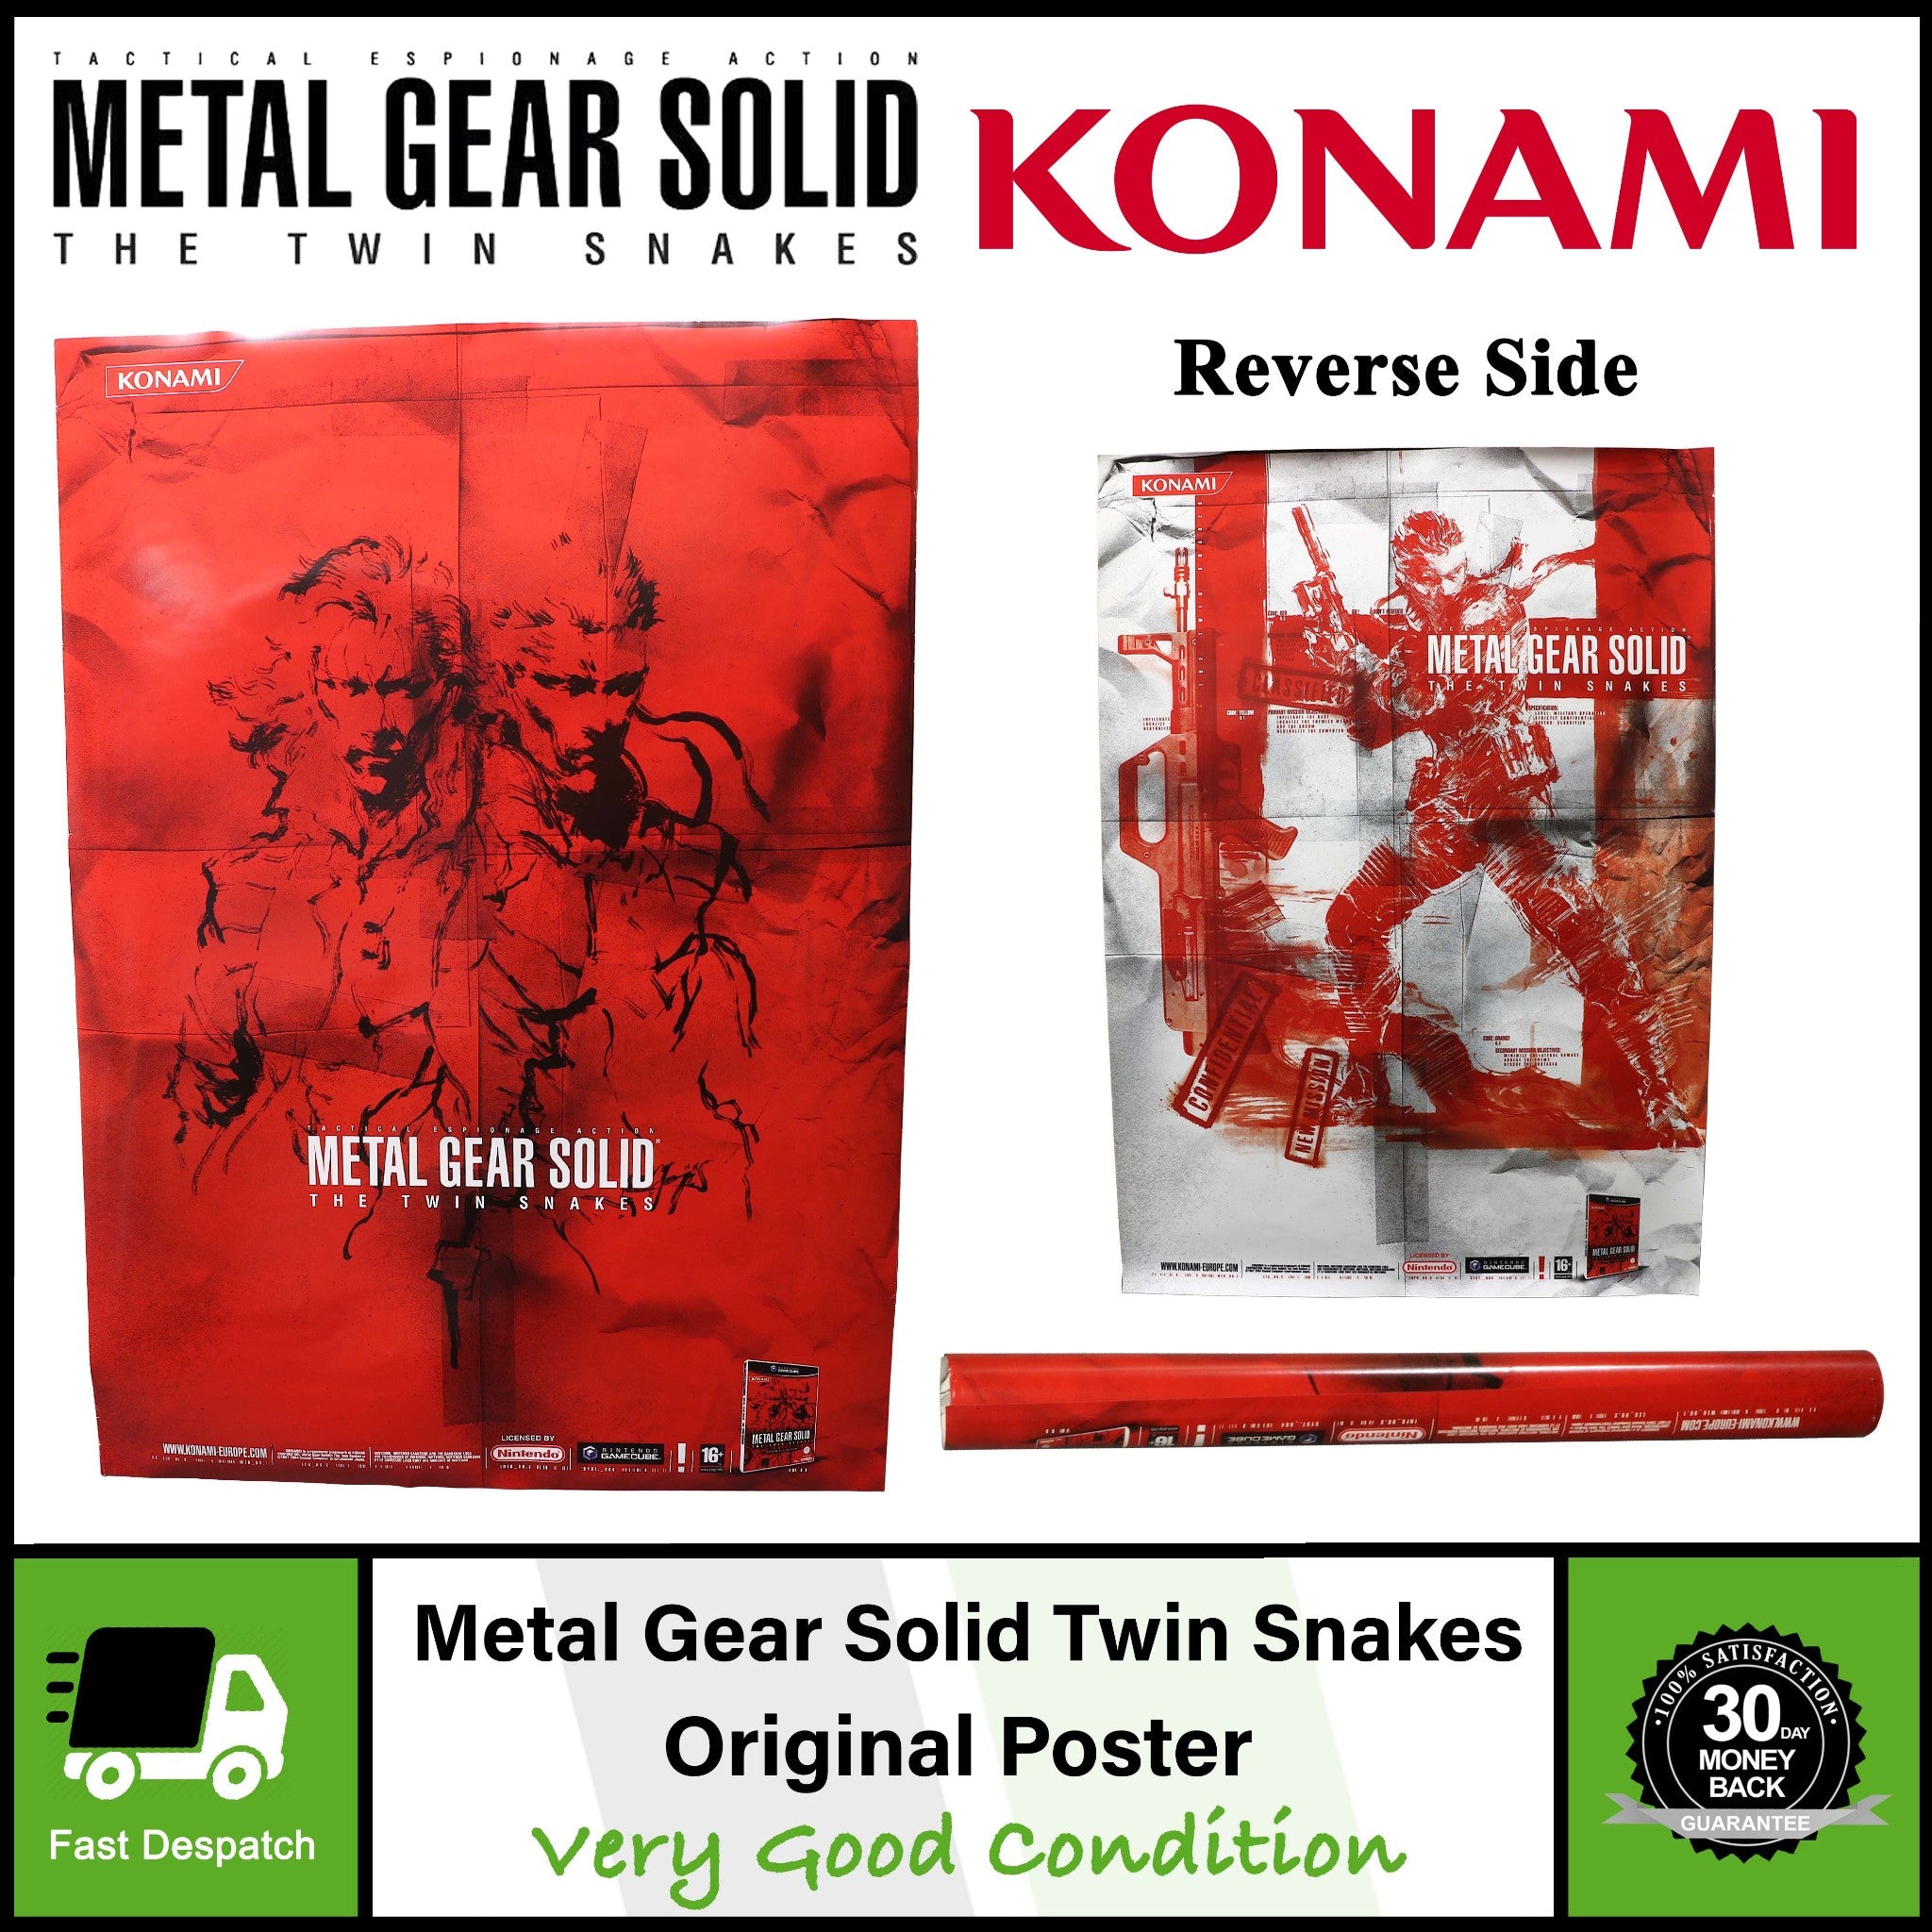 Metal Gear Solid Twin Snakes (MGS) Original (LARGE) Poster Artwork | 59.5x84cm